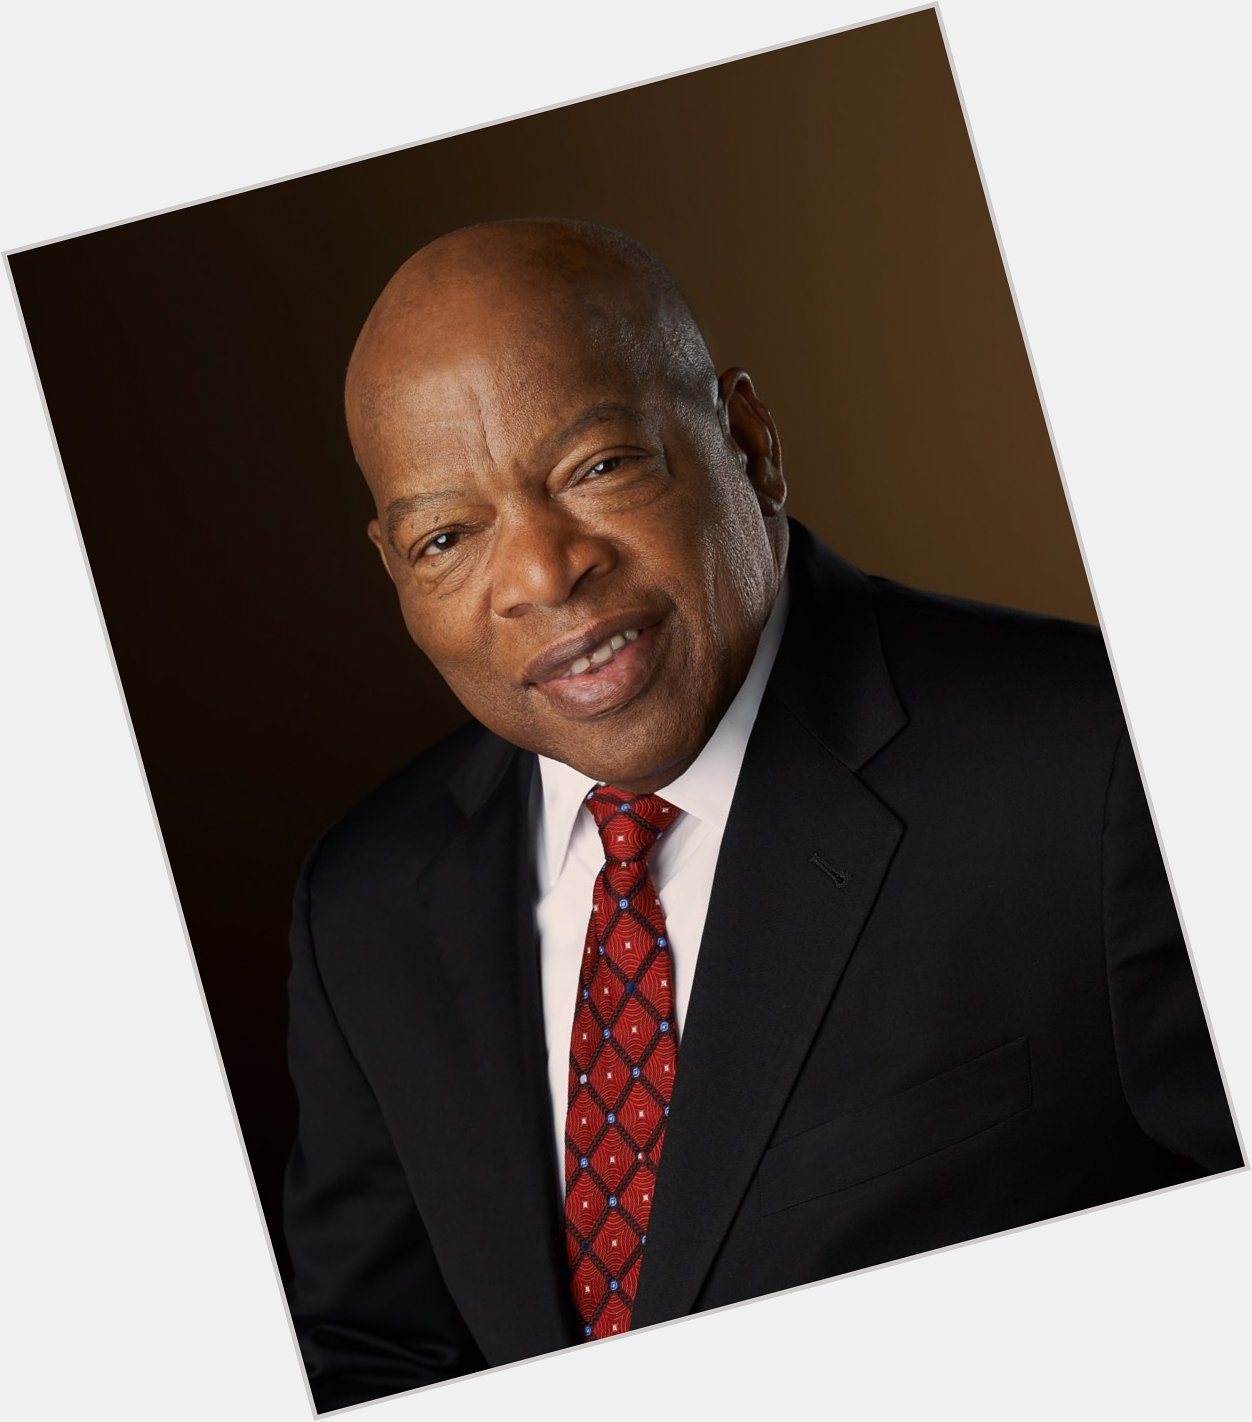 Happy birthday to U.S. Rep. John Lewis who has served since 1987! 